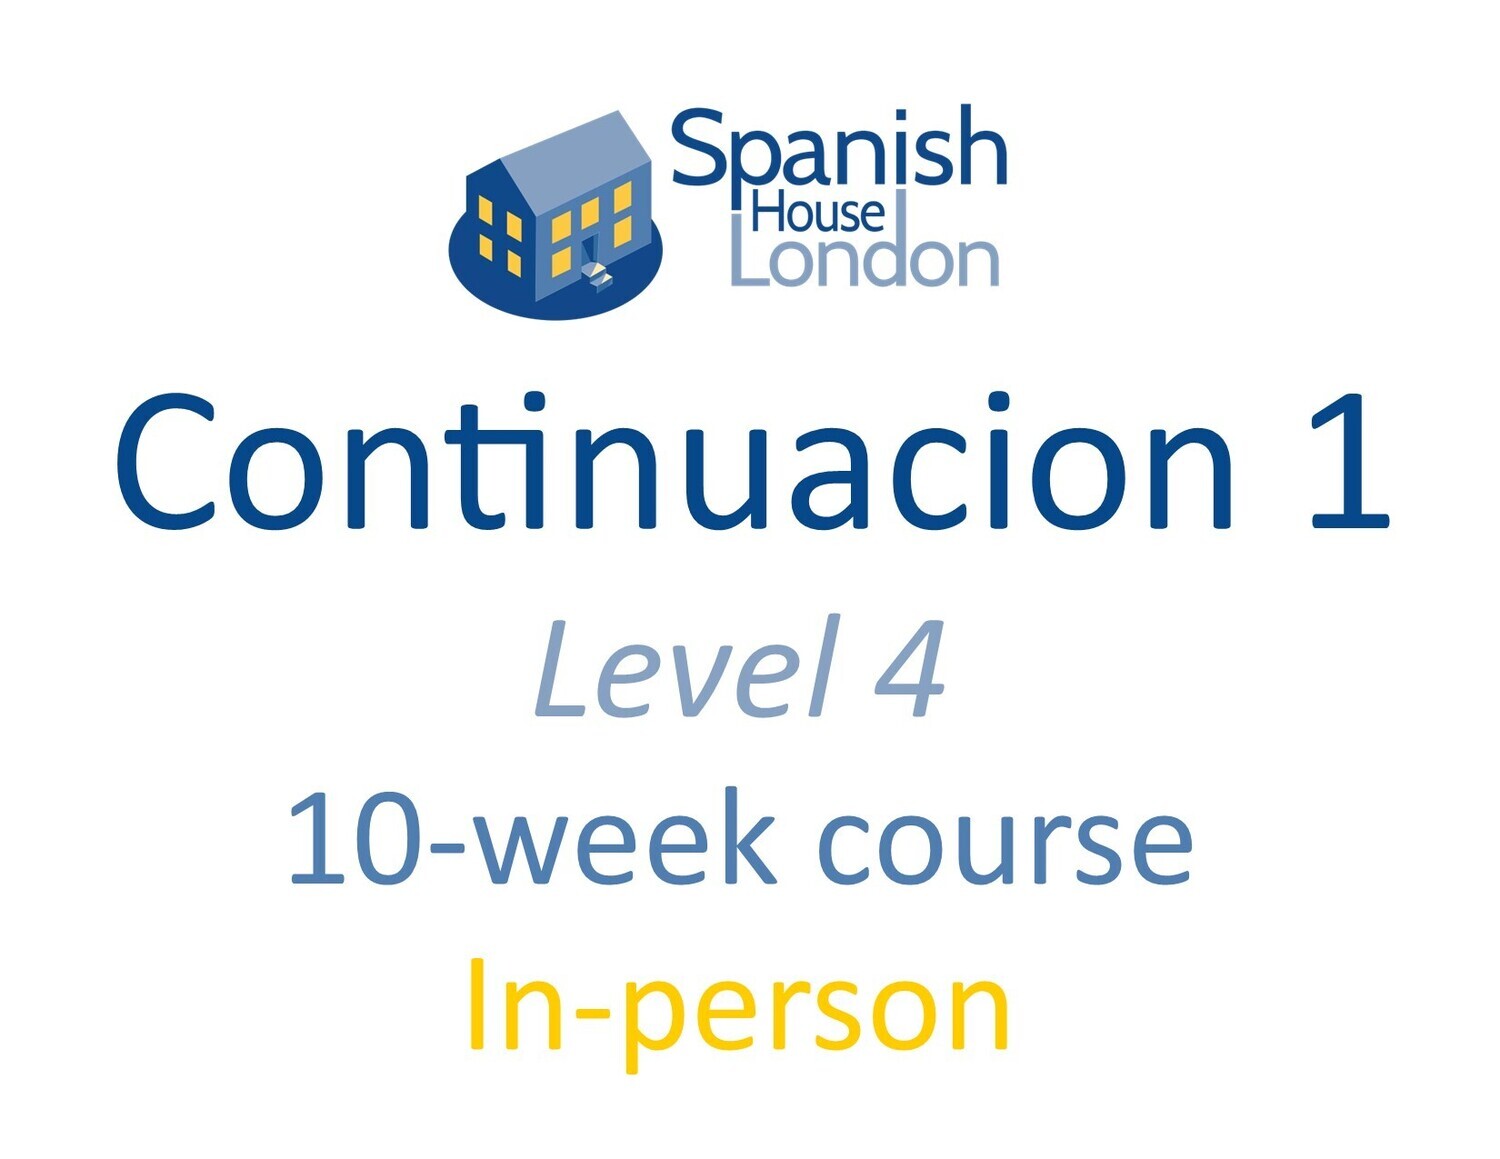 Continuacion 1 Course starting on 19th January at 6pm in Clapham North